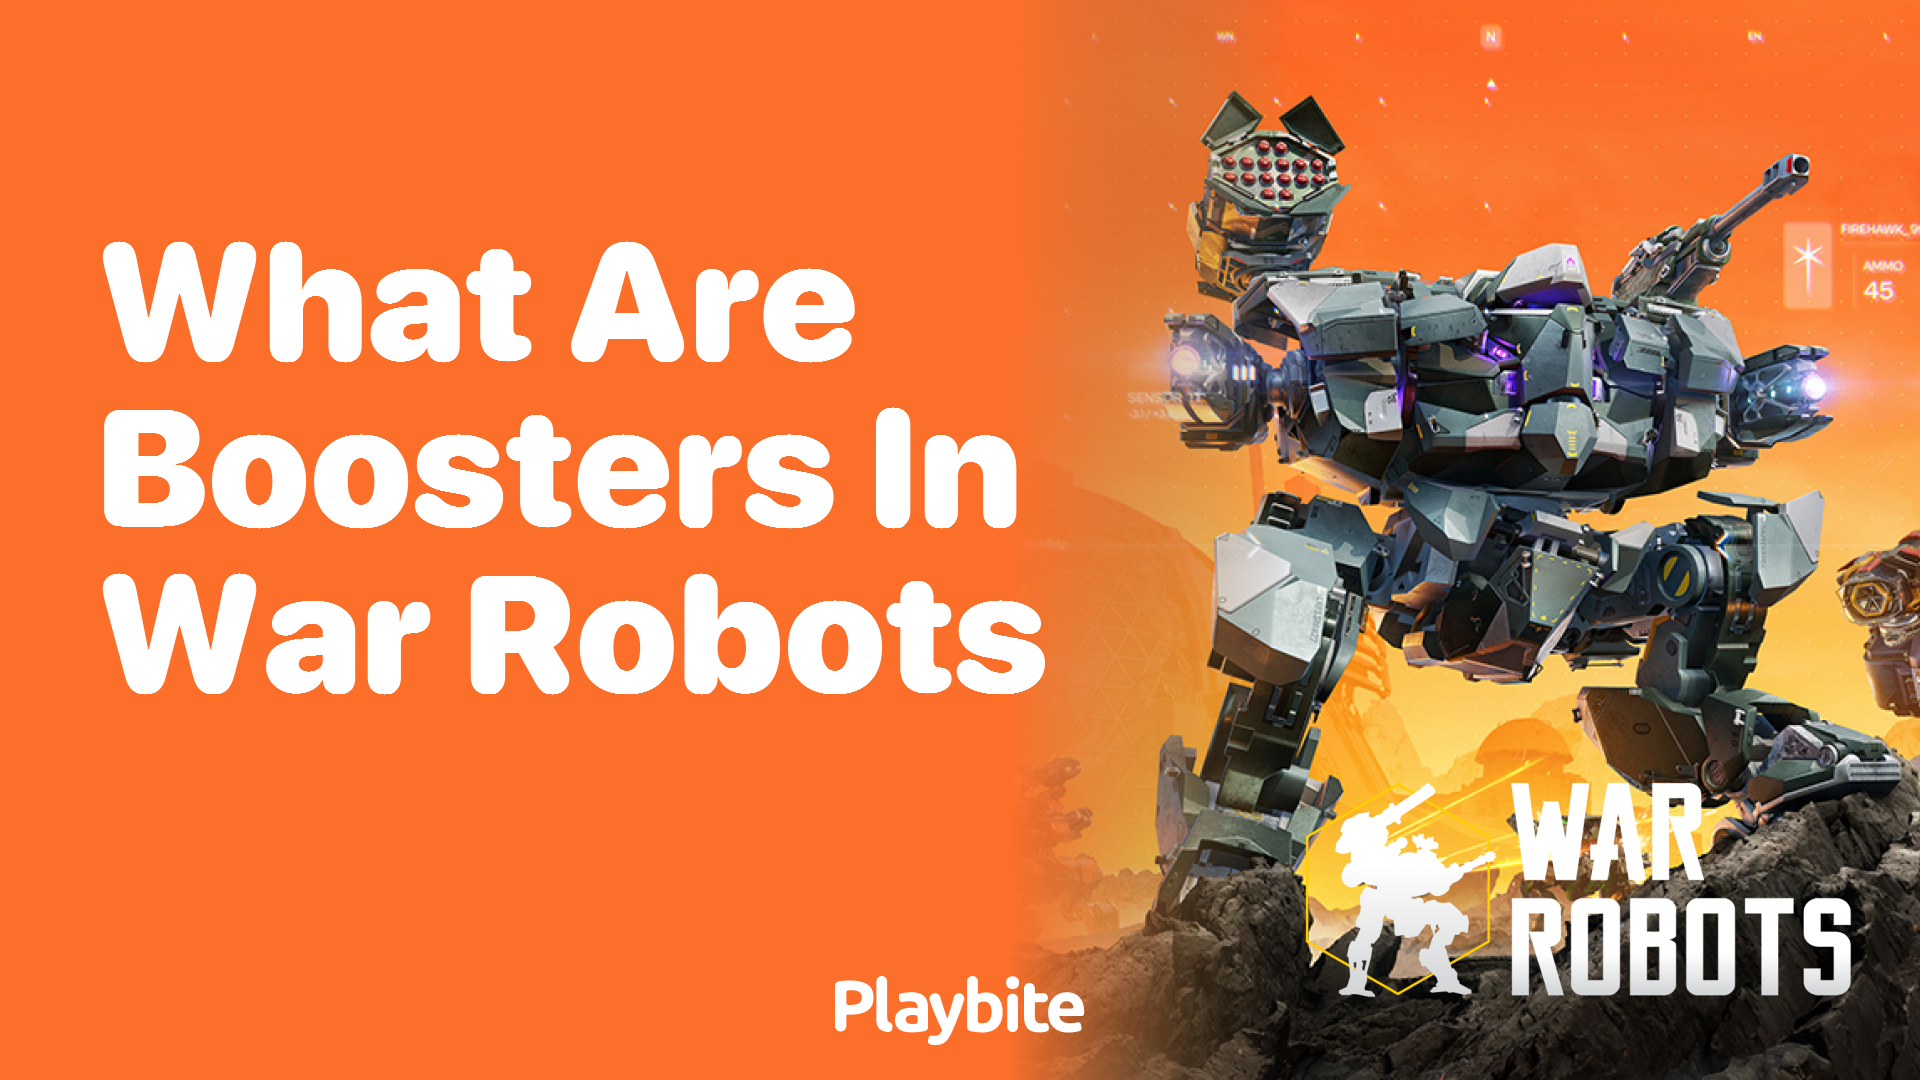 Exploring Boosters in War Robots: What Are They?